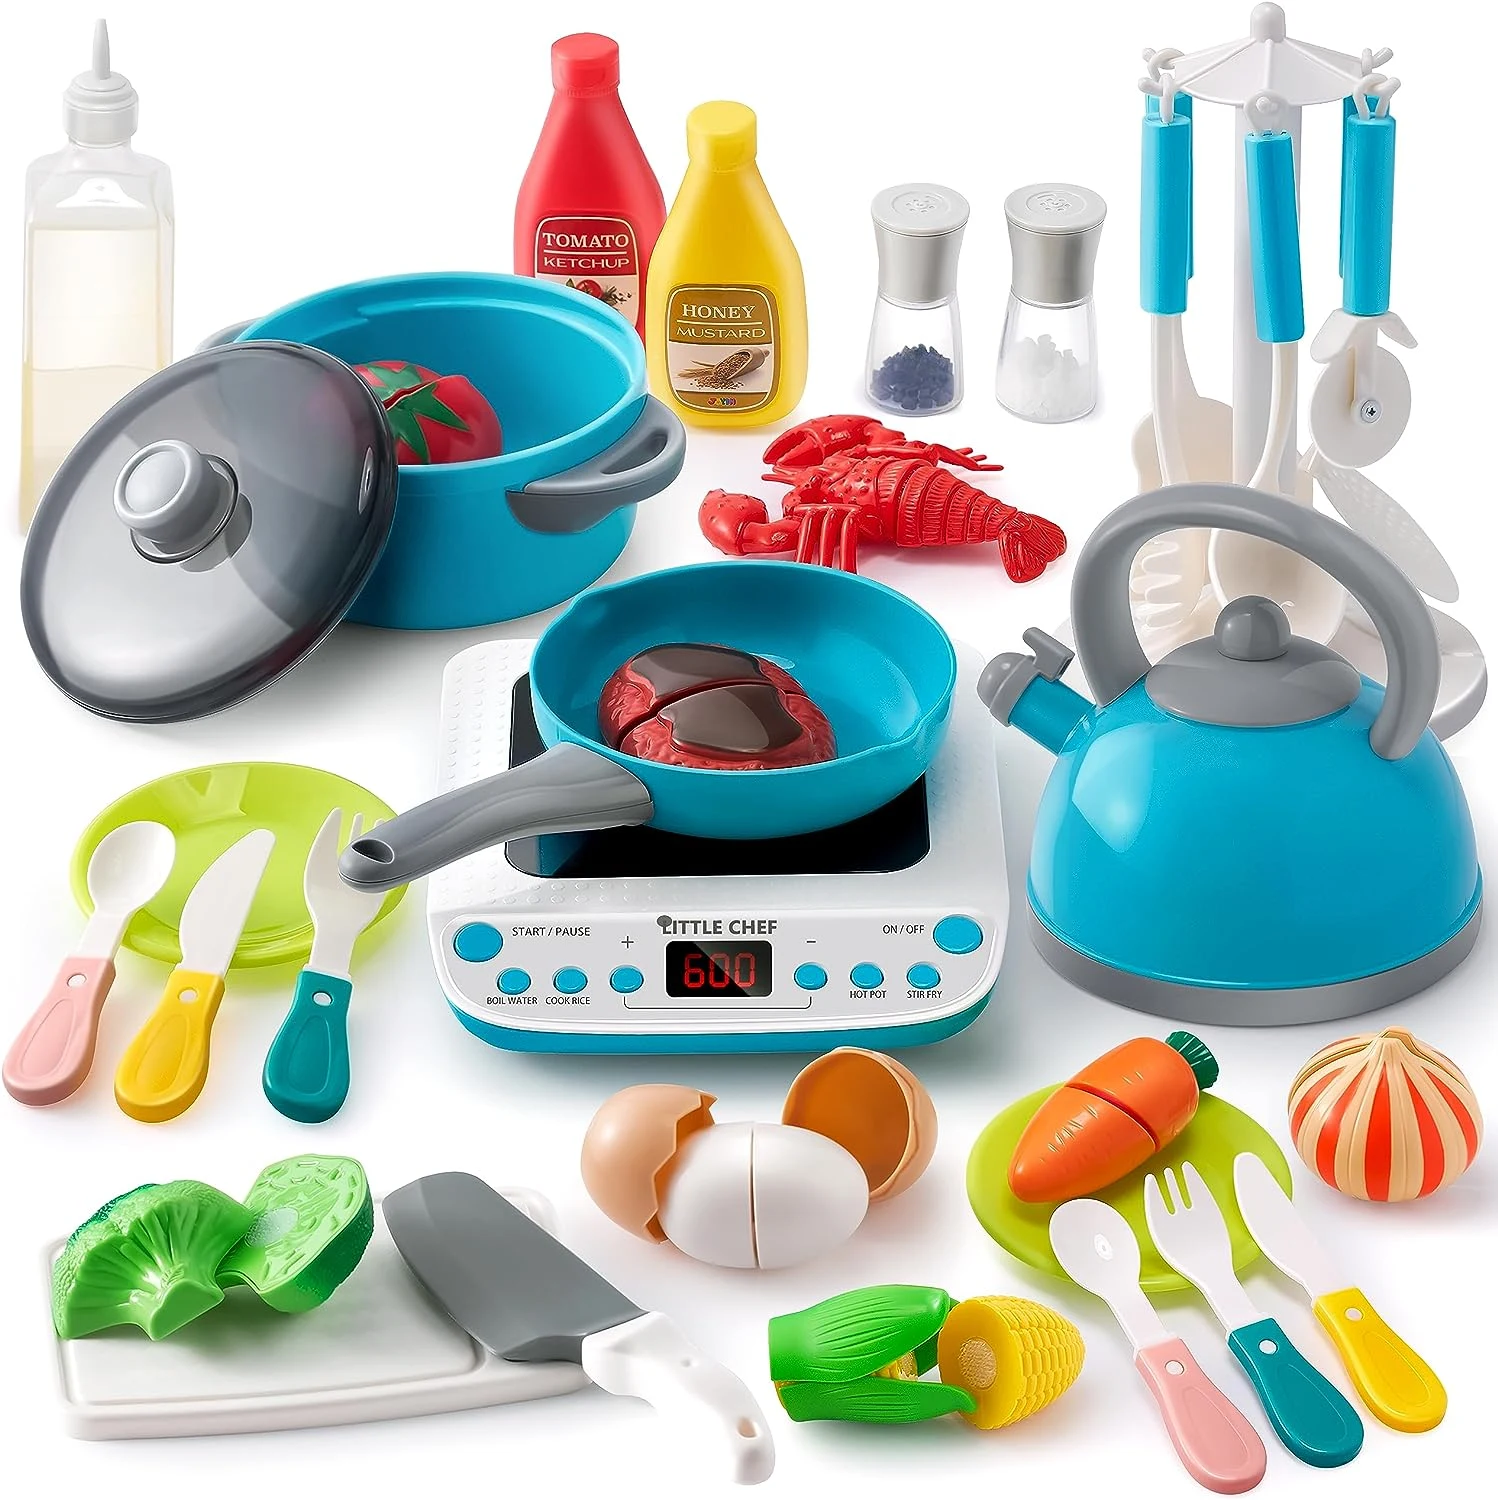 Cute Stone Kids Kitchen Play Cooking Set, Cookware Pots and Pans Playset